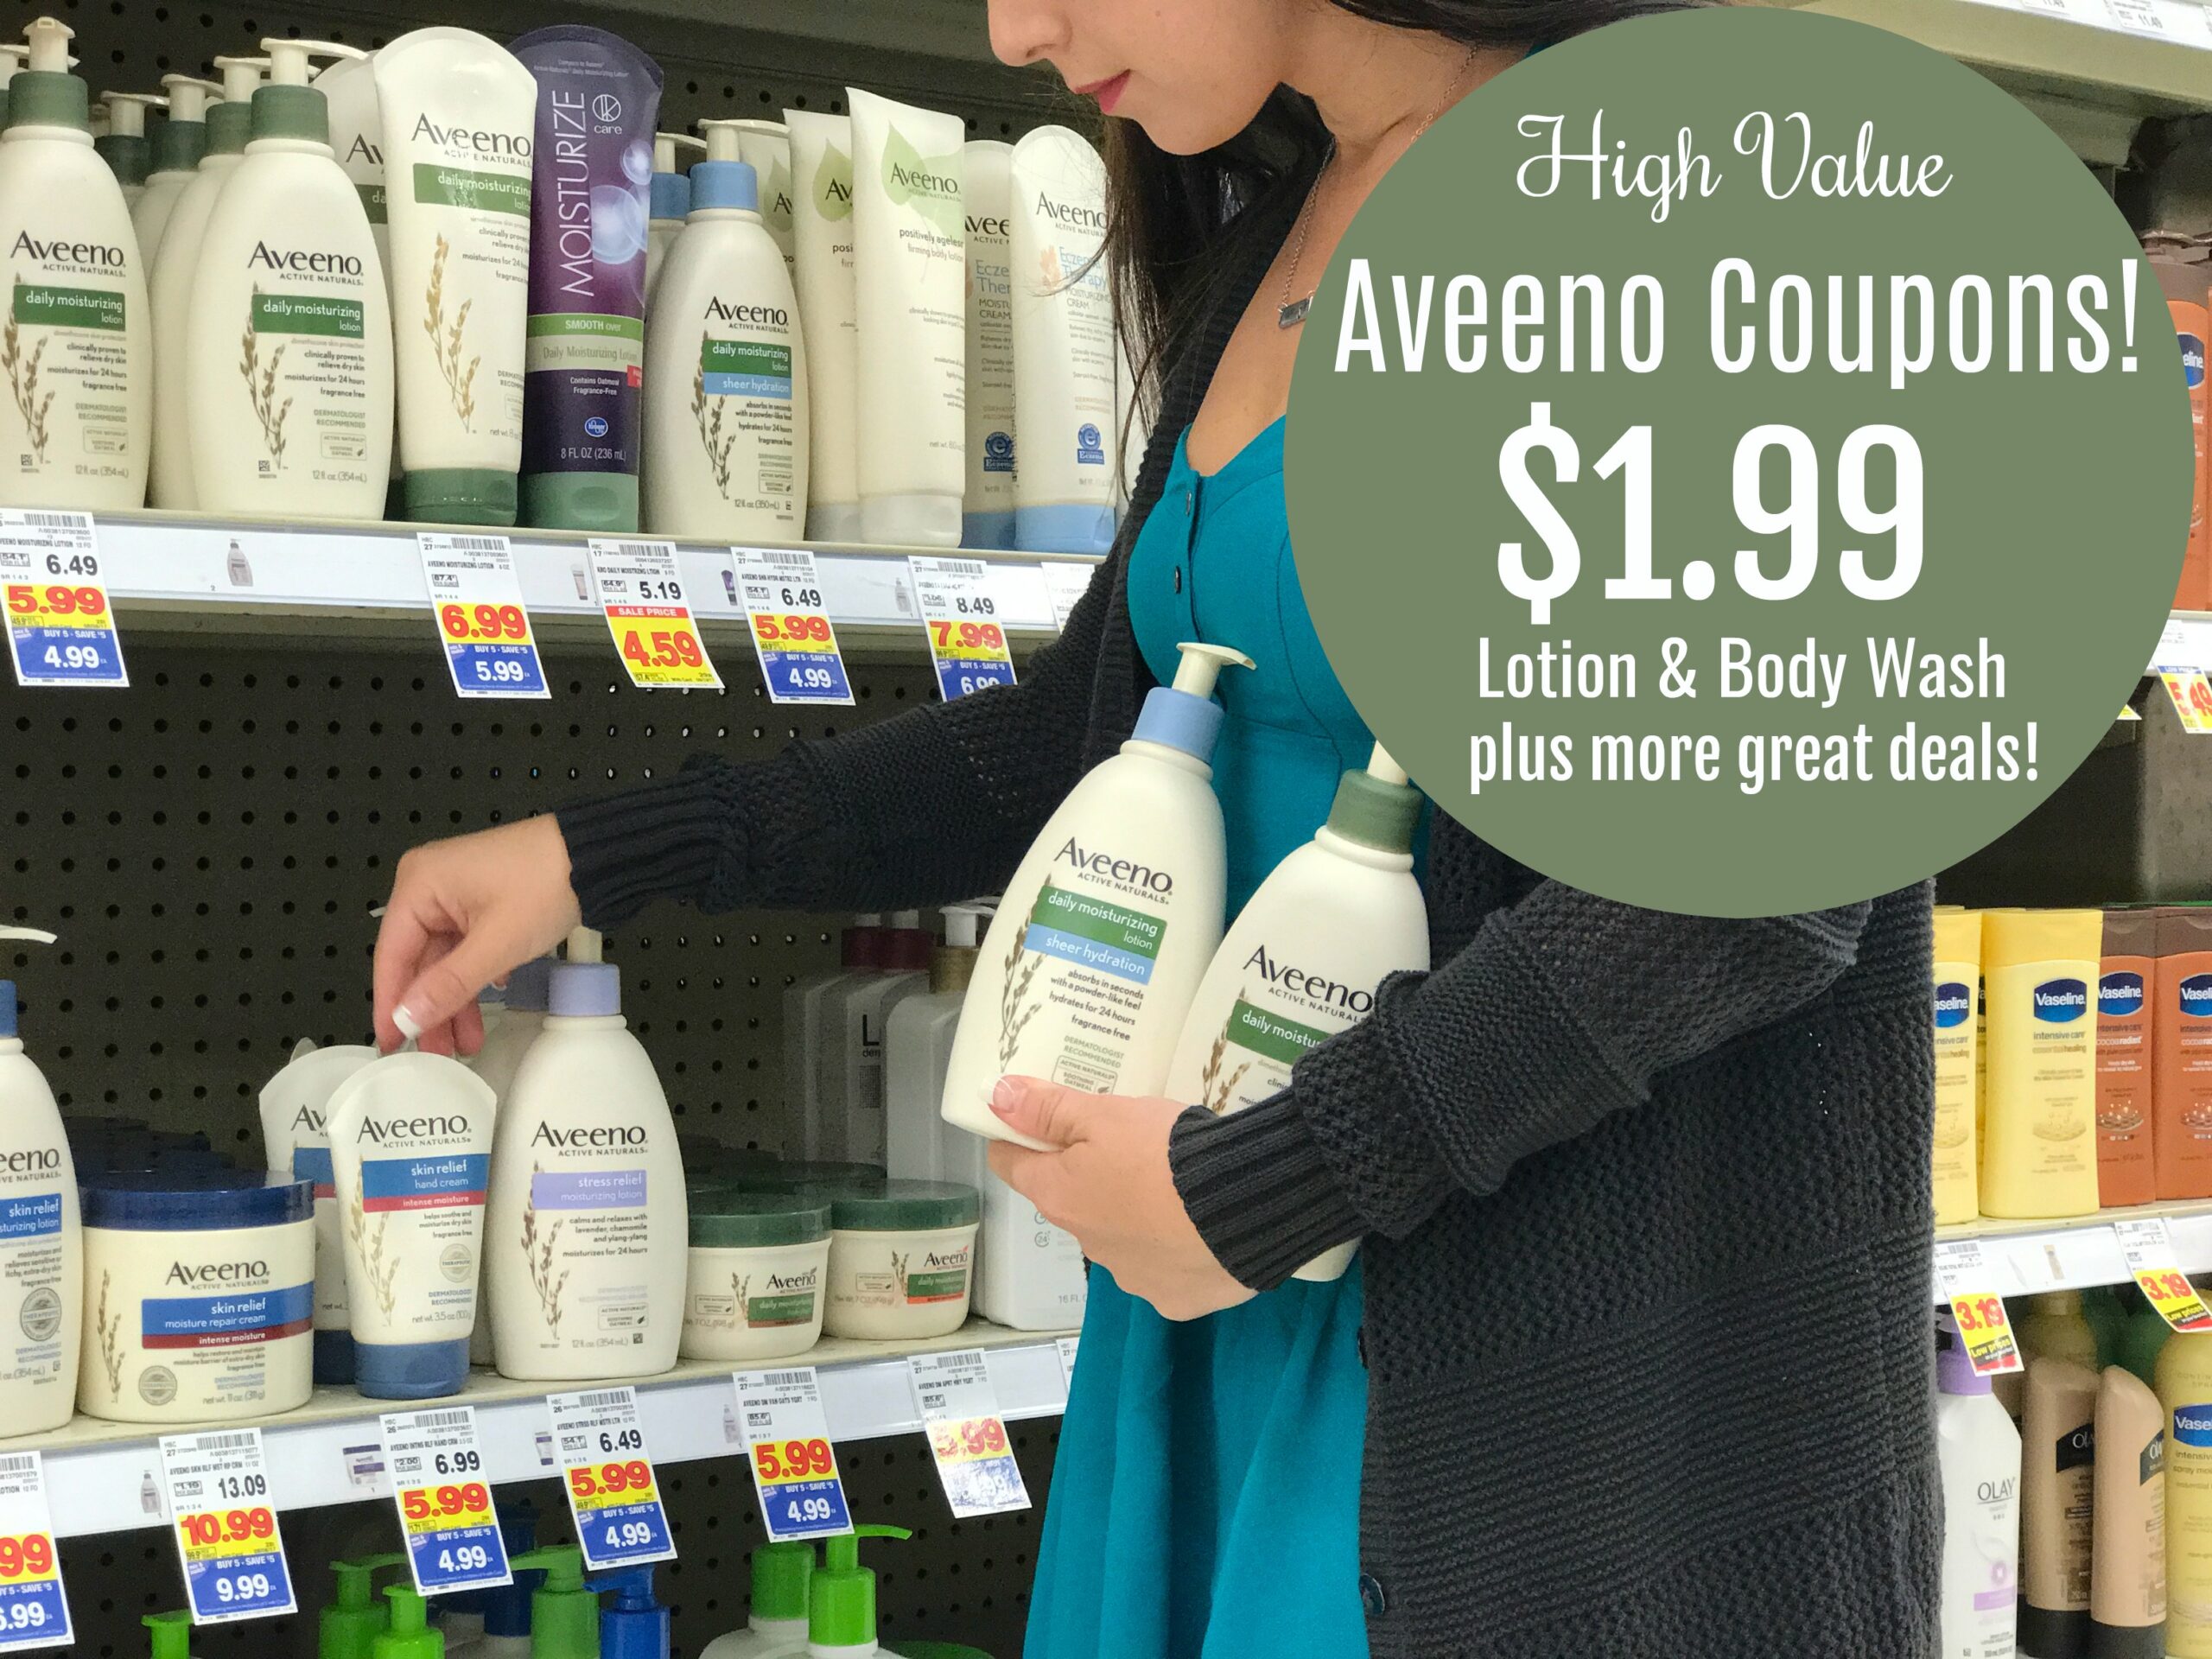 HIGH Value Aveeno Coupons! SUPER Deals on Lotion, Body Wash, Hair Care